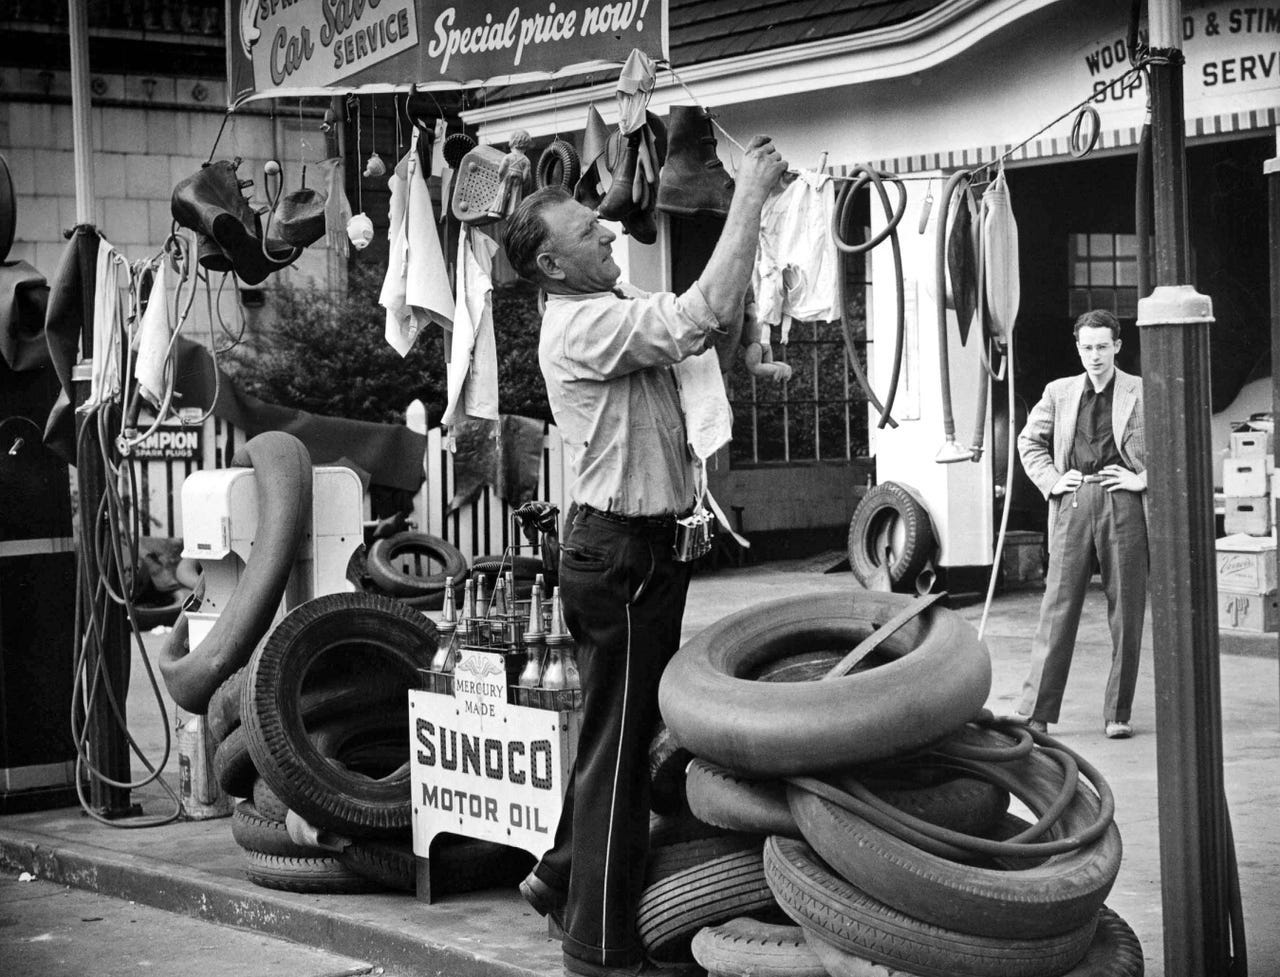 John L. Rancu, an employee at the gas station on Woodward Avenue at Stimson, collects and hangs rubber products to be recycled for the salvage effort during World War II on July 30, 1942.